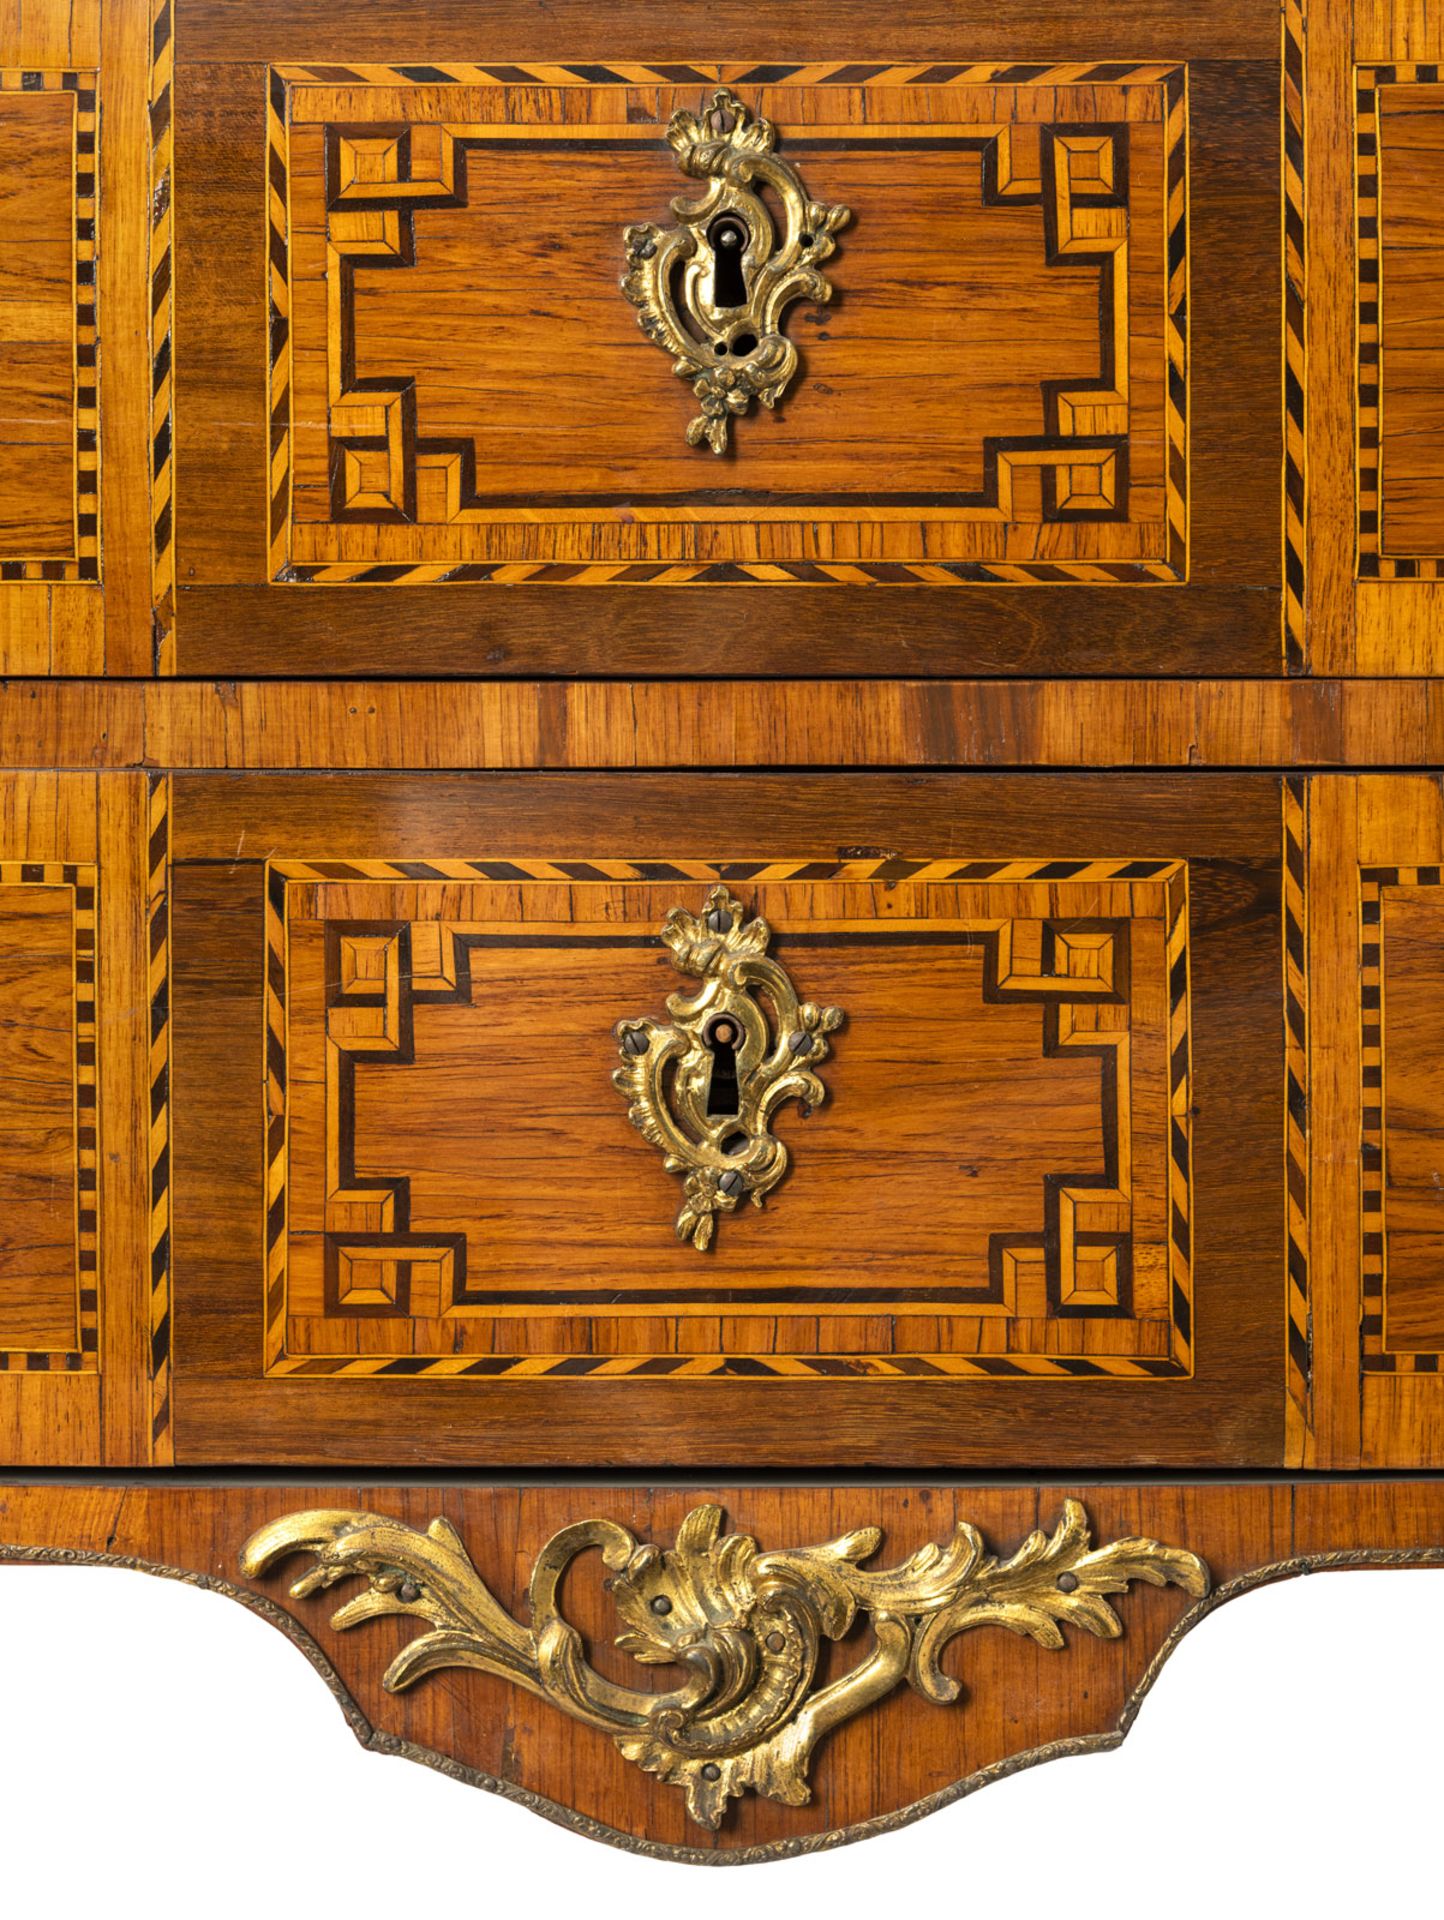 A FRENCH TRANSITIONAL STYLE ORMOLU MOUNTED KINGWOOD AMARANTH AND FRUITWOOD MARQUETRY COMMODE - Image 5 of 9